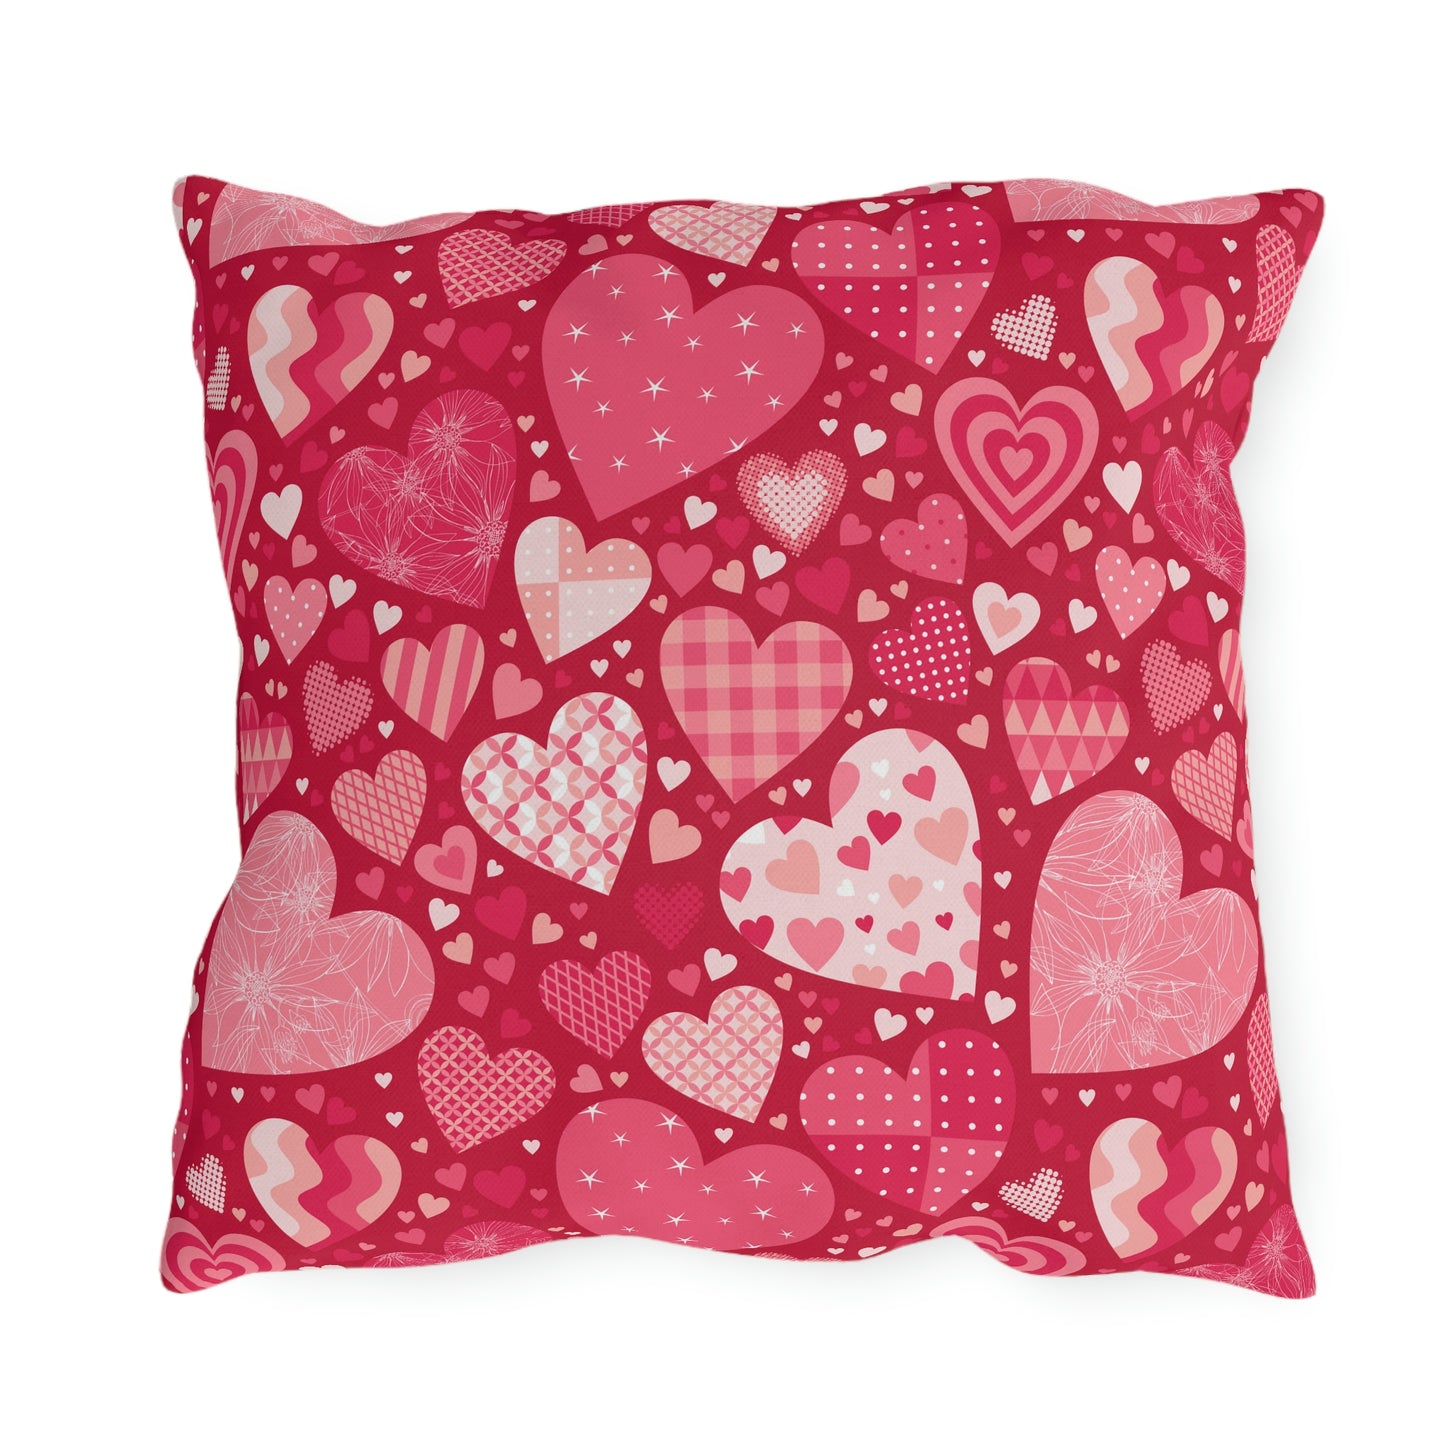 Blissful Hearts Outdoor Pillow